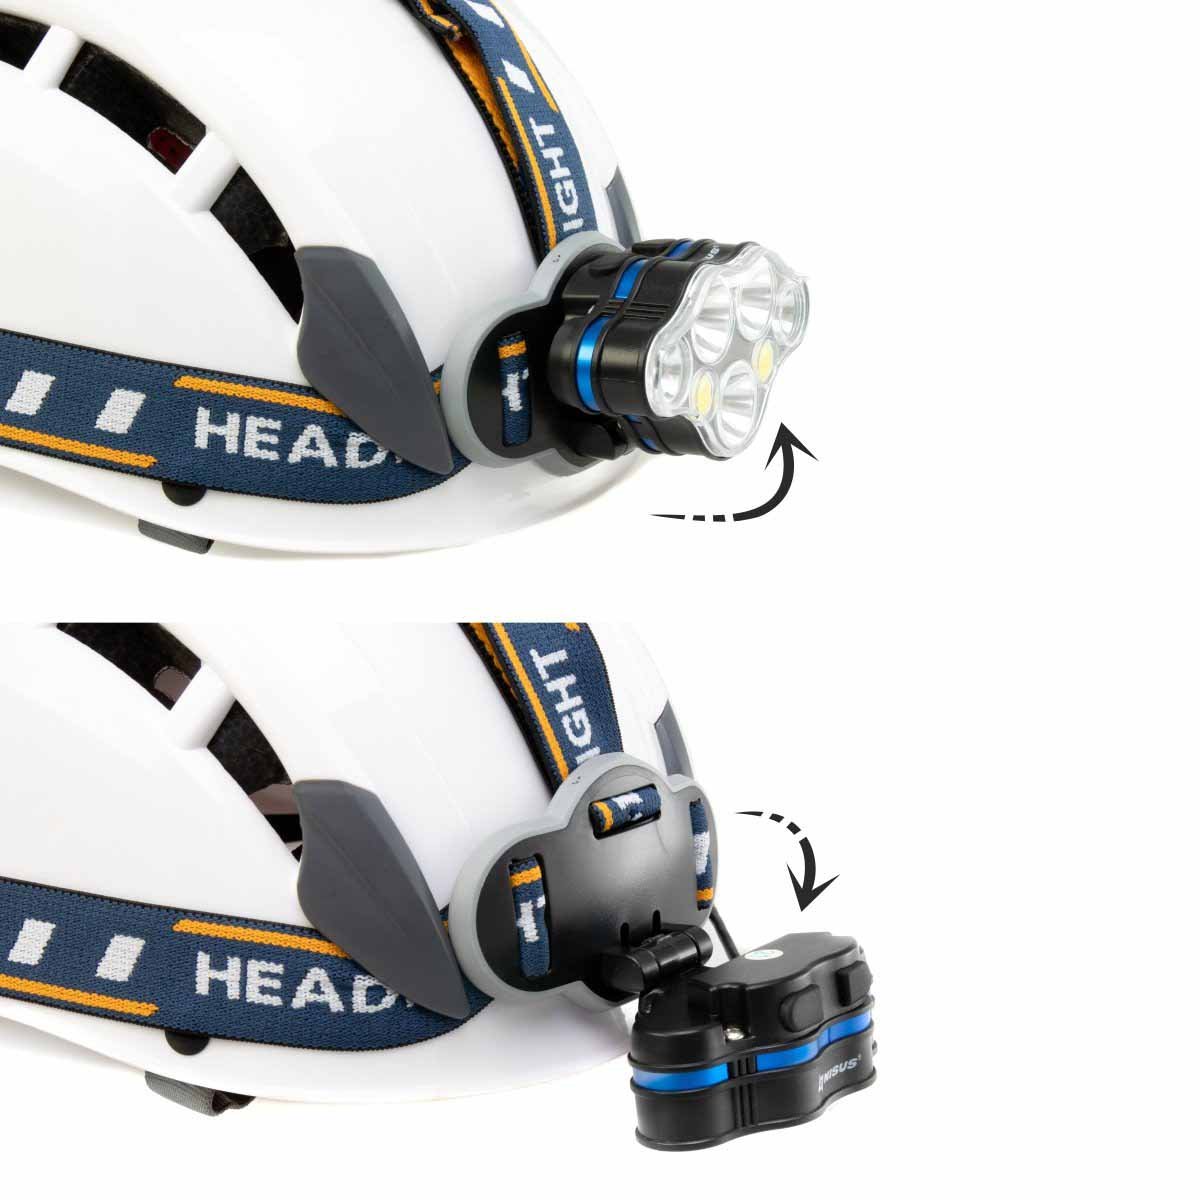 The flashlight at the LED Rechargeable Water-resistant Headlamp, could be easily turned down